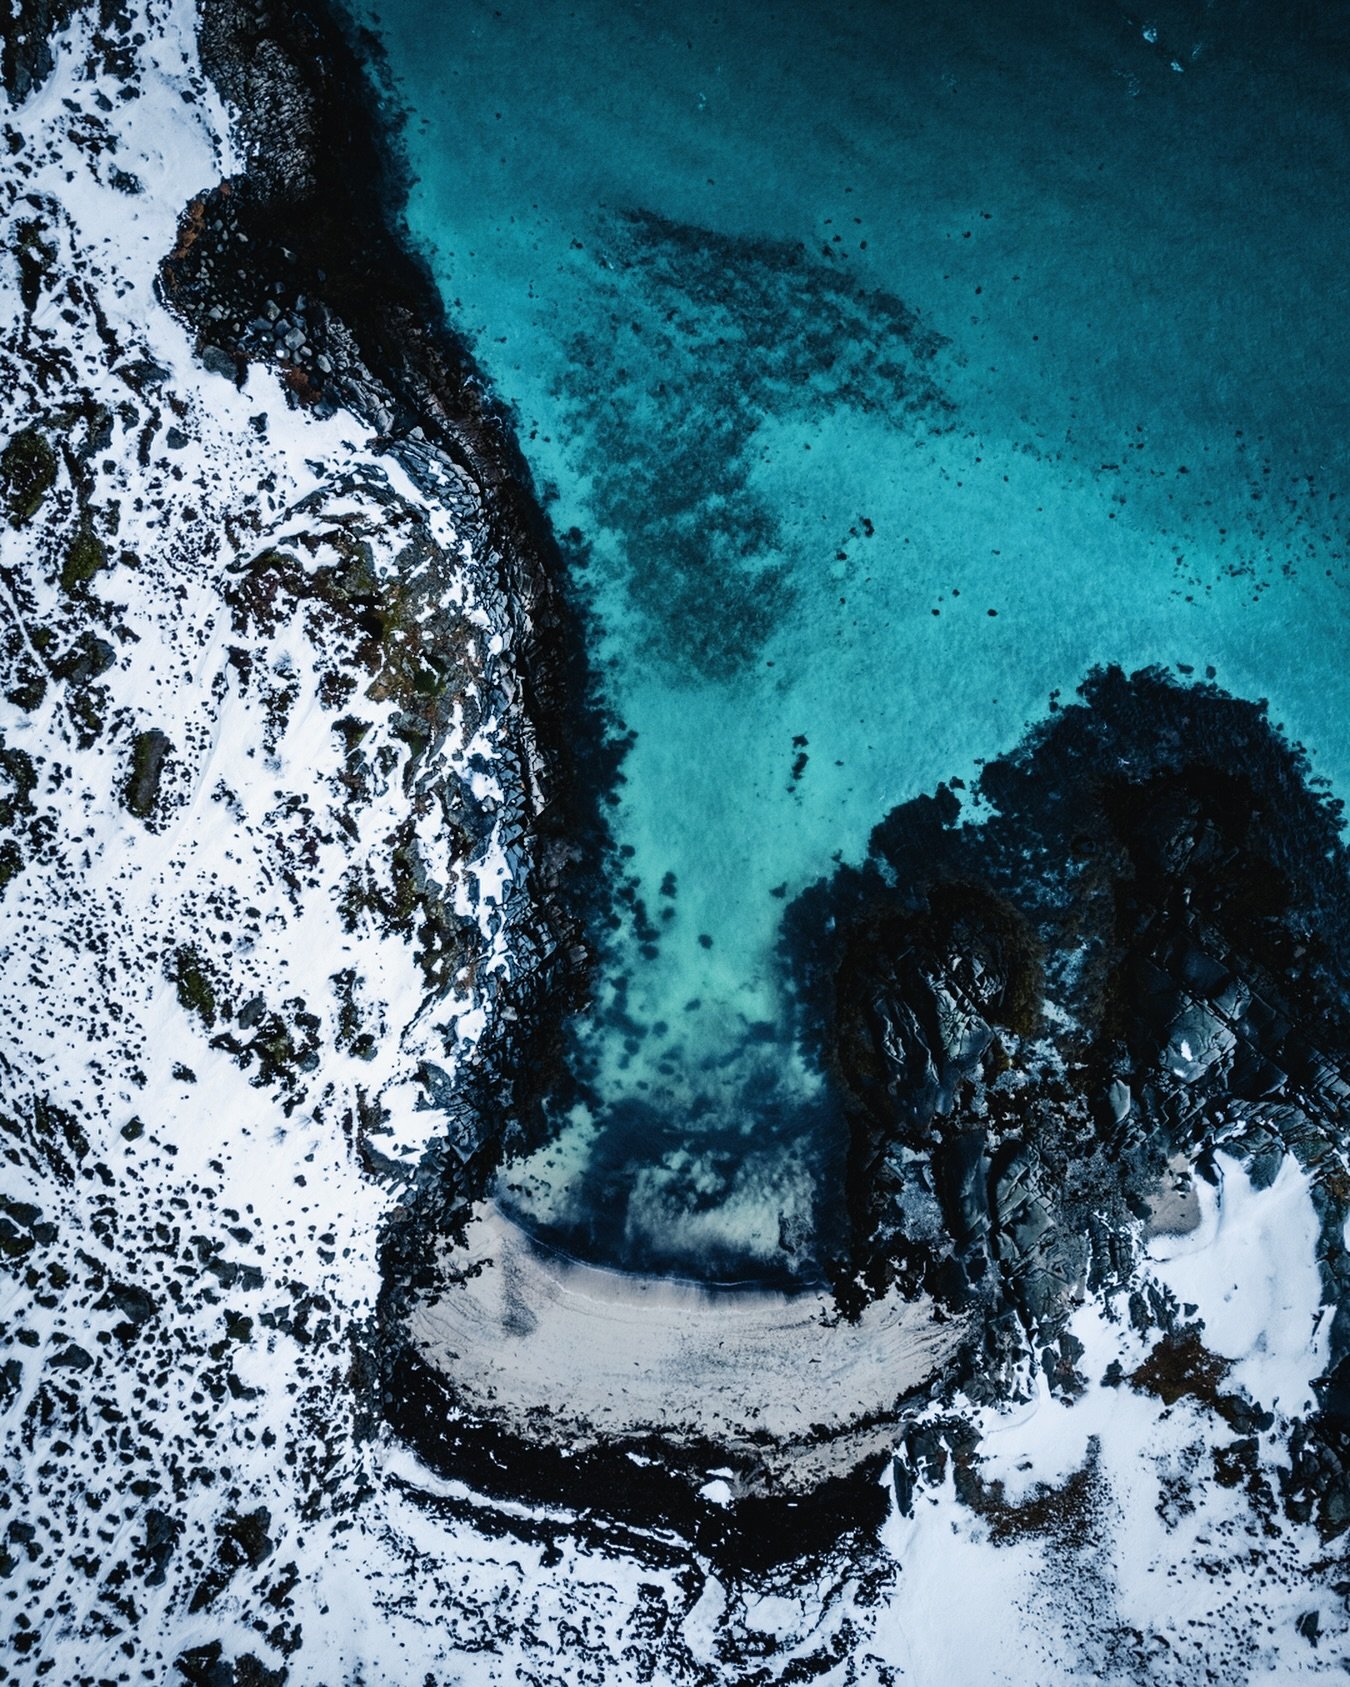 Just love locations that lend themselves for a nice top-down-drone-shot and this little beach on the northern coast of Lofoten Islands is definitely one of these spots. 
The colour of the water just contrasts so nicely with the dark rocks partially c